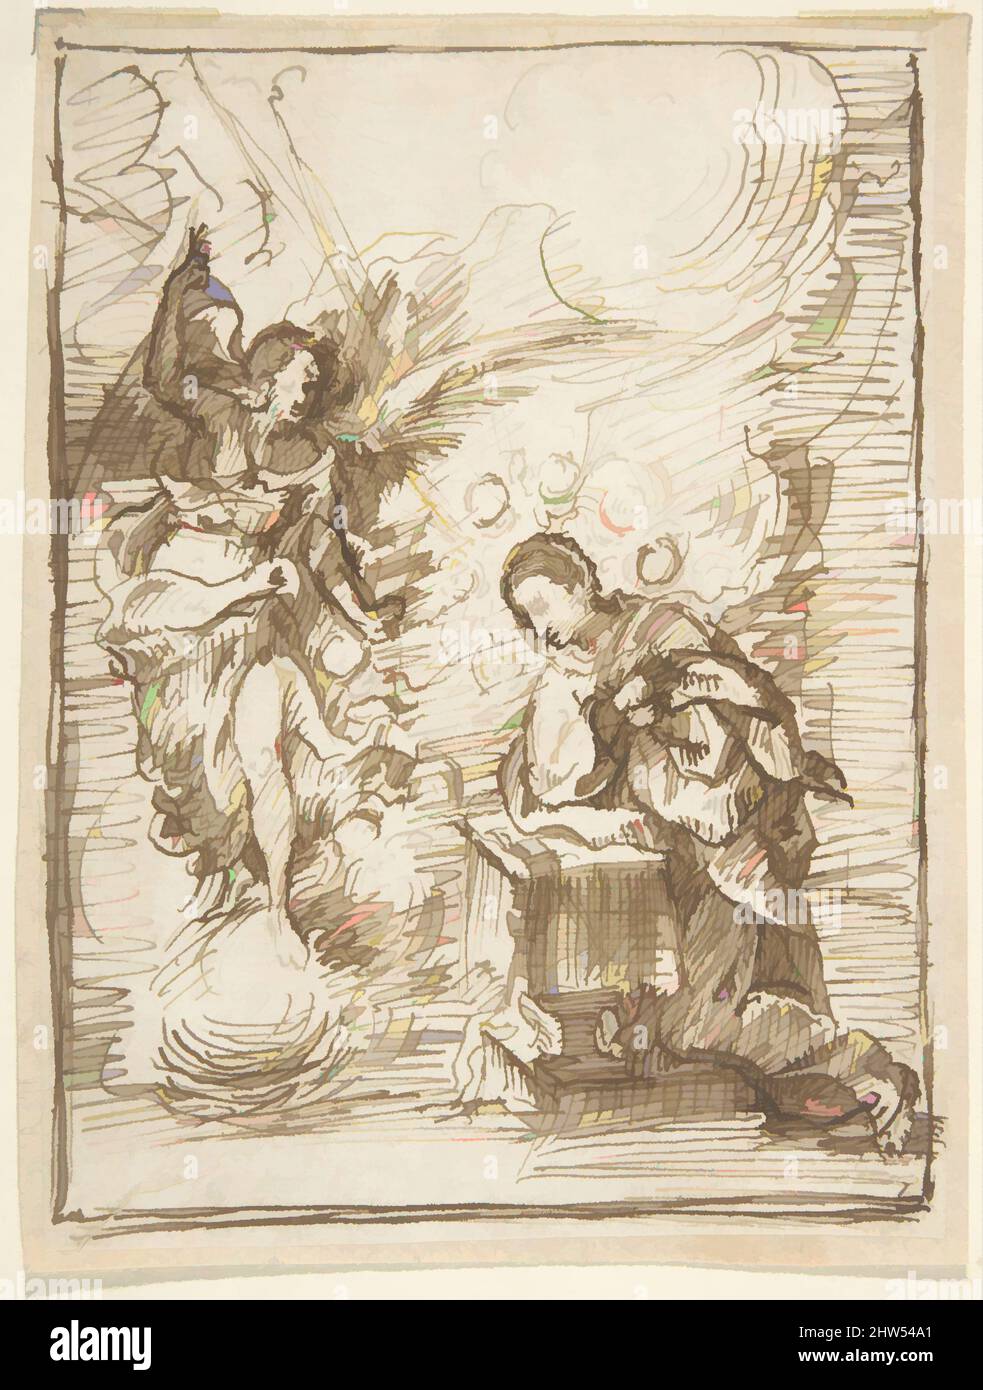 Art inspired by The Annunciation, 17th century, Pen and dark brown ink. Composition outlined in the same, by the artist. On off-white paper, 5-11/16 x 4-3/16 in. (14.5 x 10.7 cm), Drawings, Anonymous, Spanish, School of Seville, 17th century, Classic works modernized by Artotop with a splash of modernity. Shapes, color and value, eye-catching visual impact on art. Emotions through freedom of artworks in a contemporary way. A timeless message pursuing a wildly creative new direction. Artists turning to the digital medium and creating the Artotop NFT Stock Photo